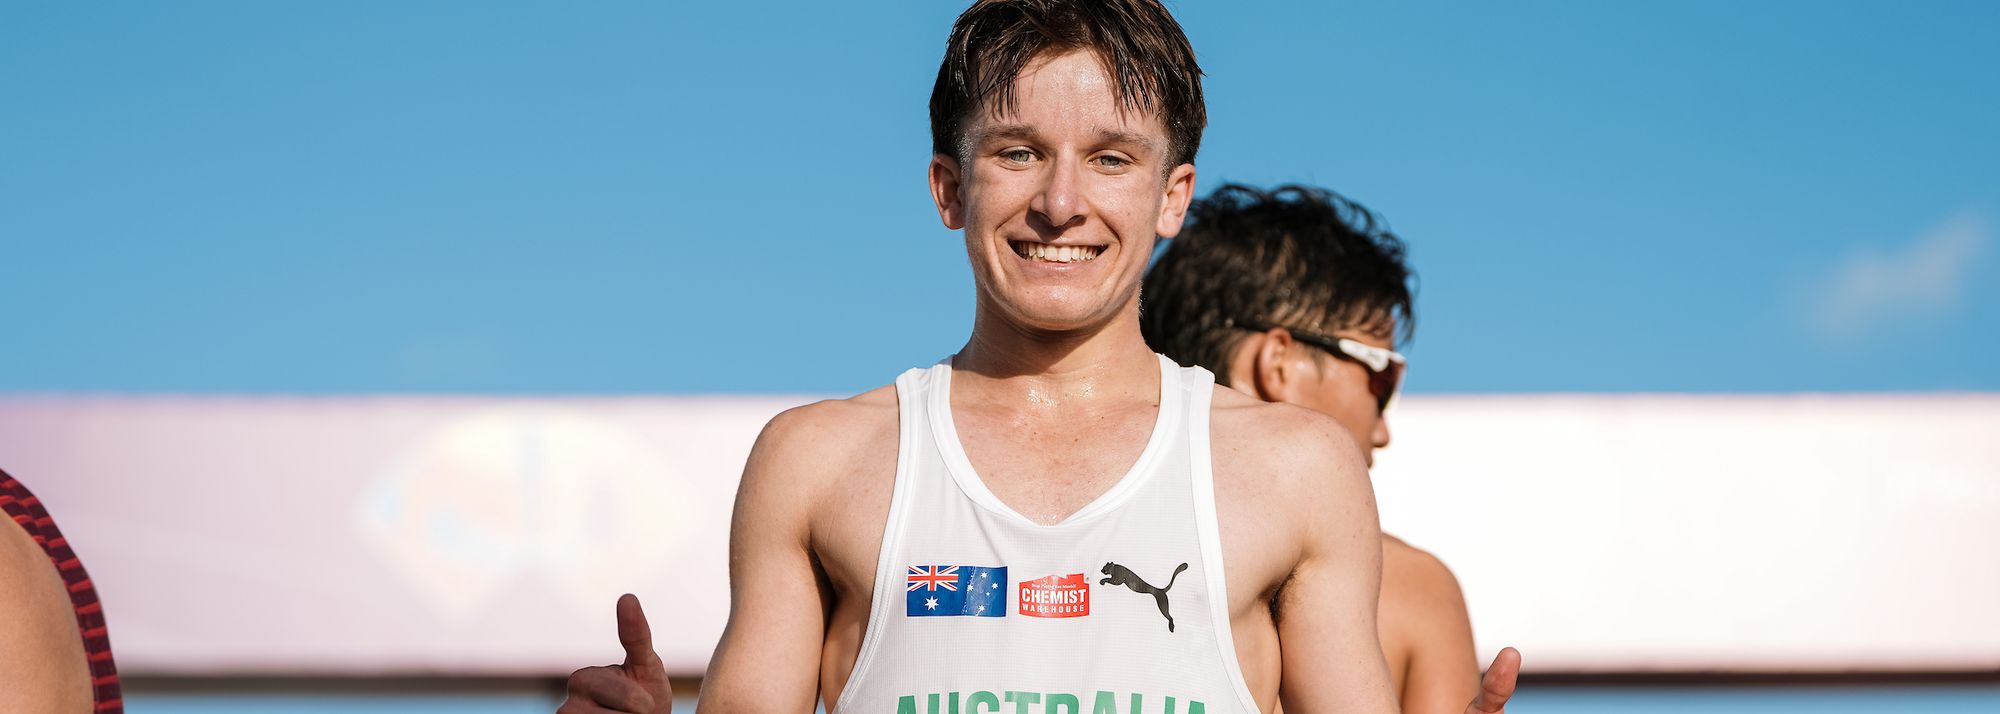 Despite thinking he was “done for” in the closing stages of the U20 men’s 10km at the World Athletics Race Walking Team Championships Antalya 24, Isaac Beacroft refused to give up